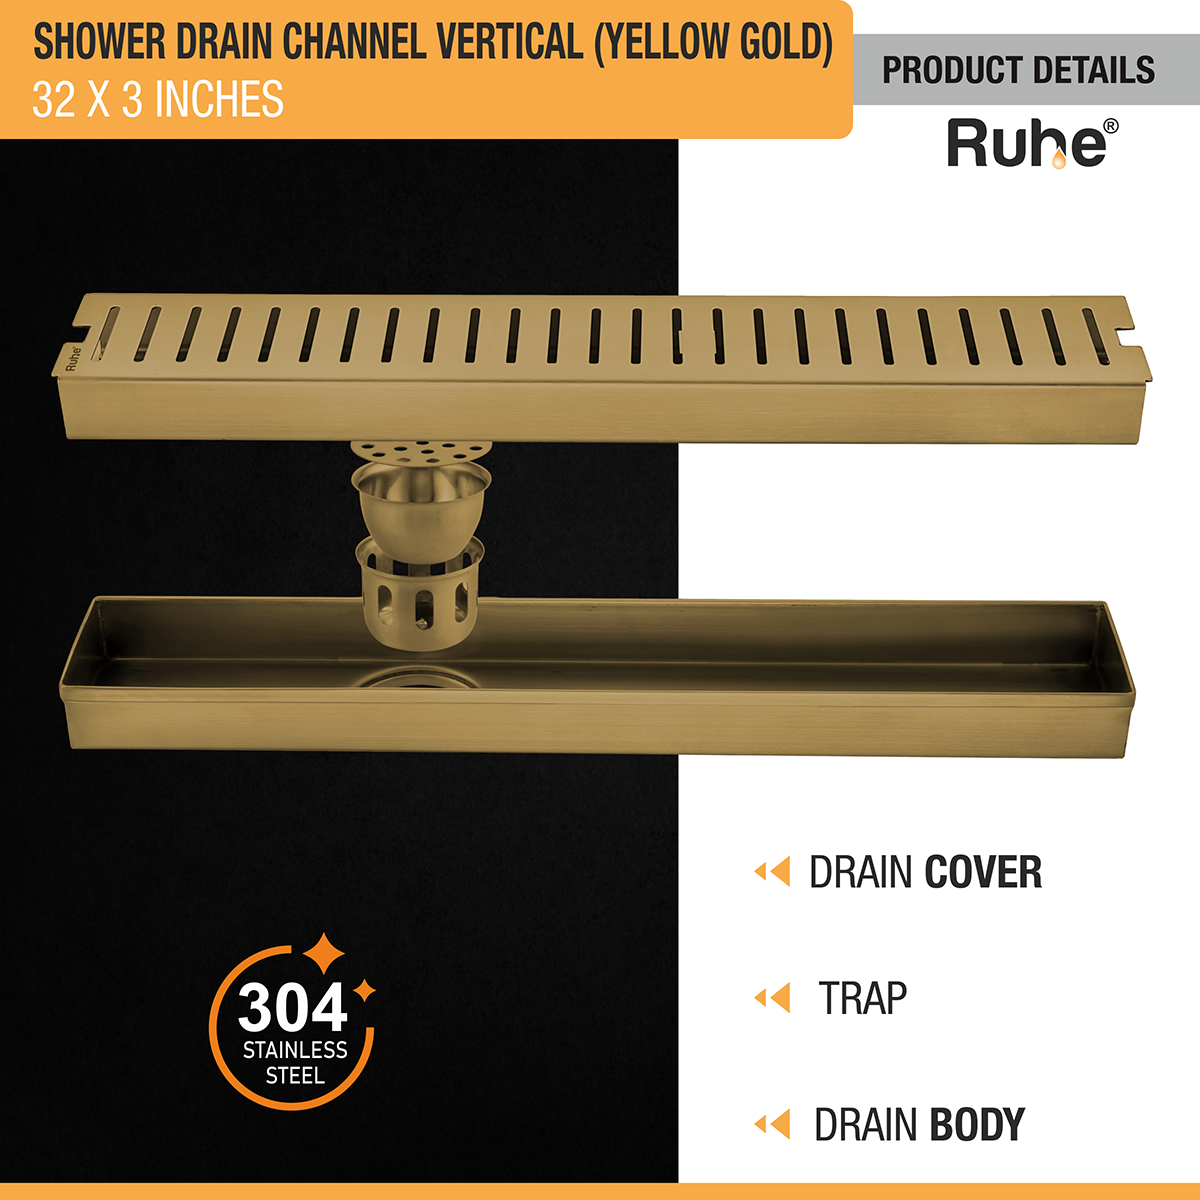 Vertical Shower Drain Channel (32 x 3 Inches) YELLOW GOLD product details